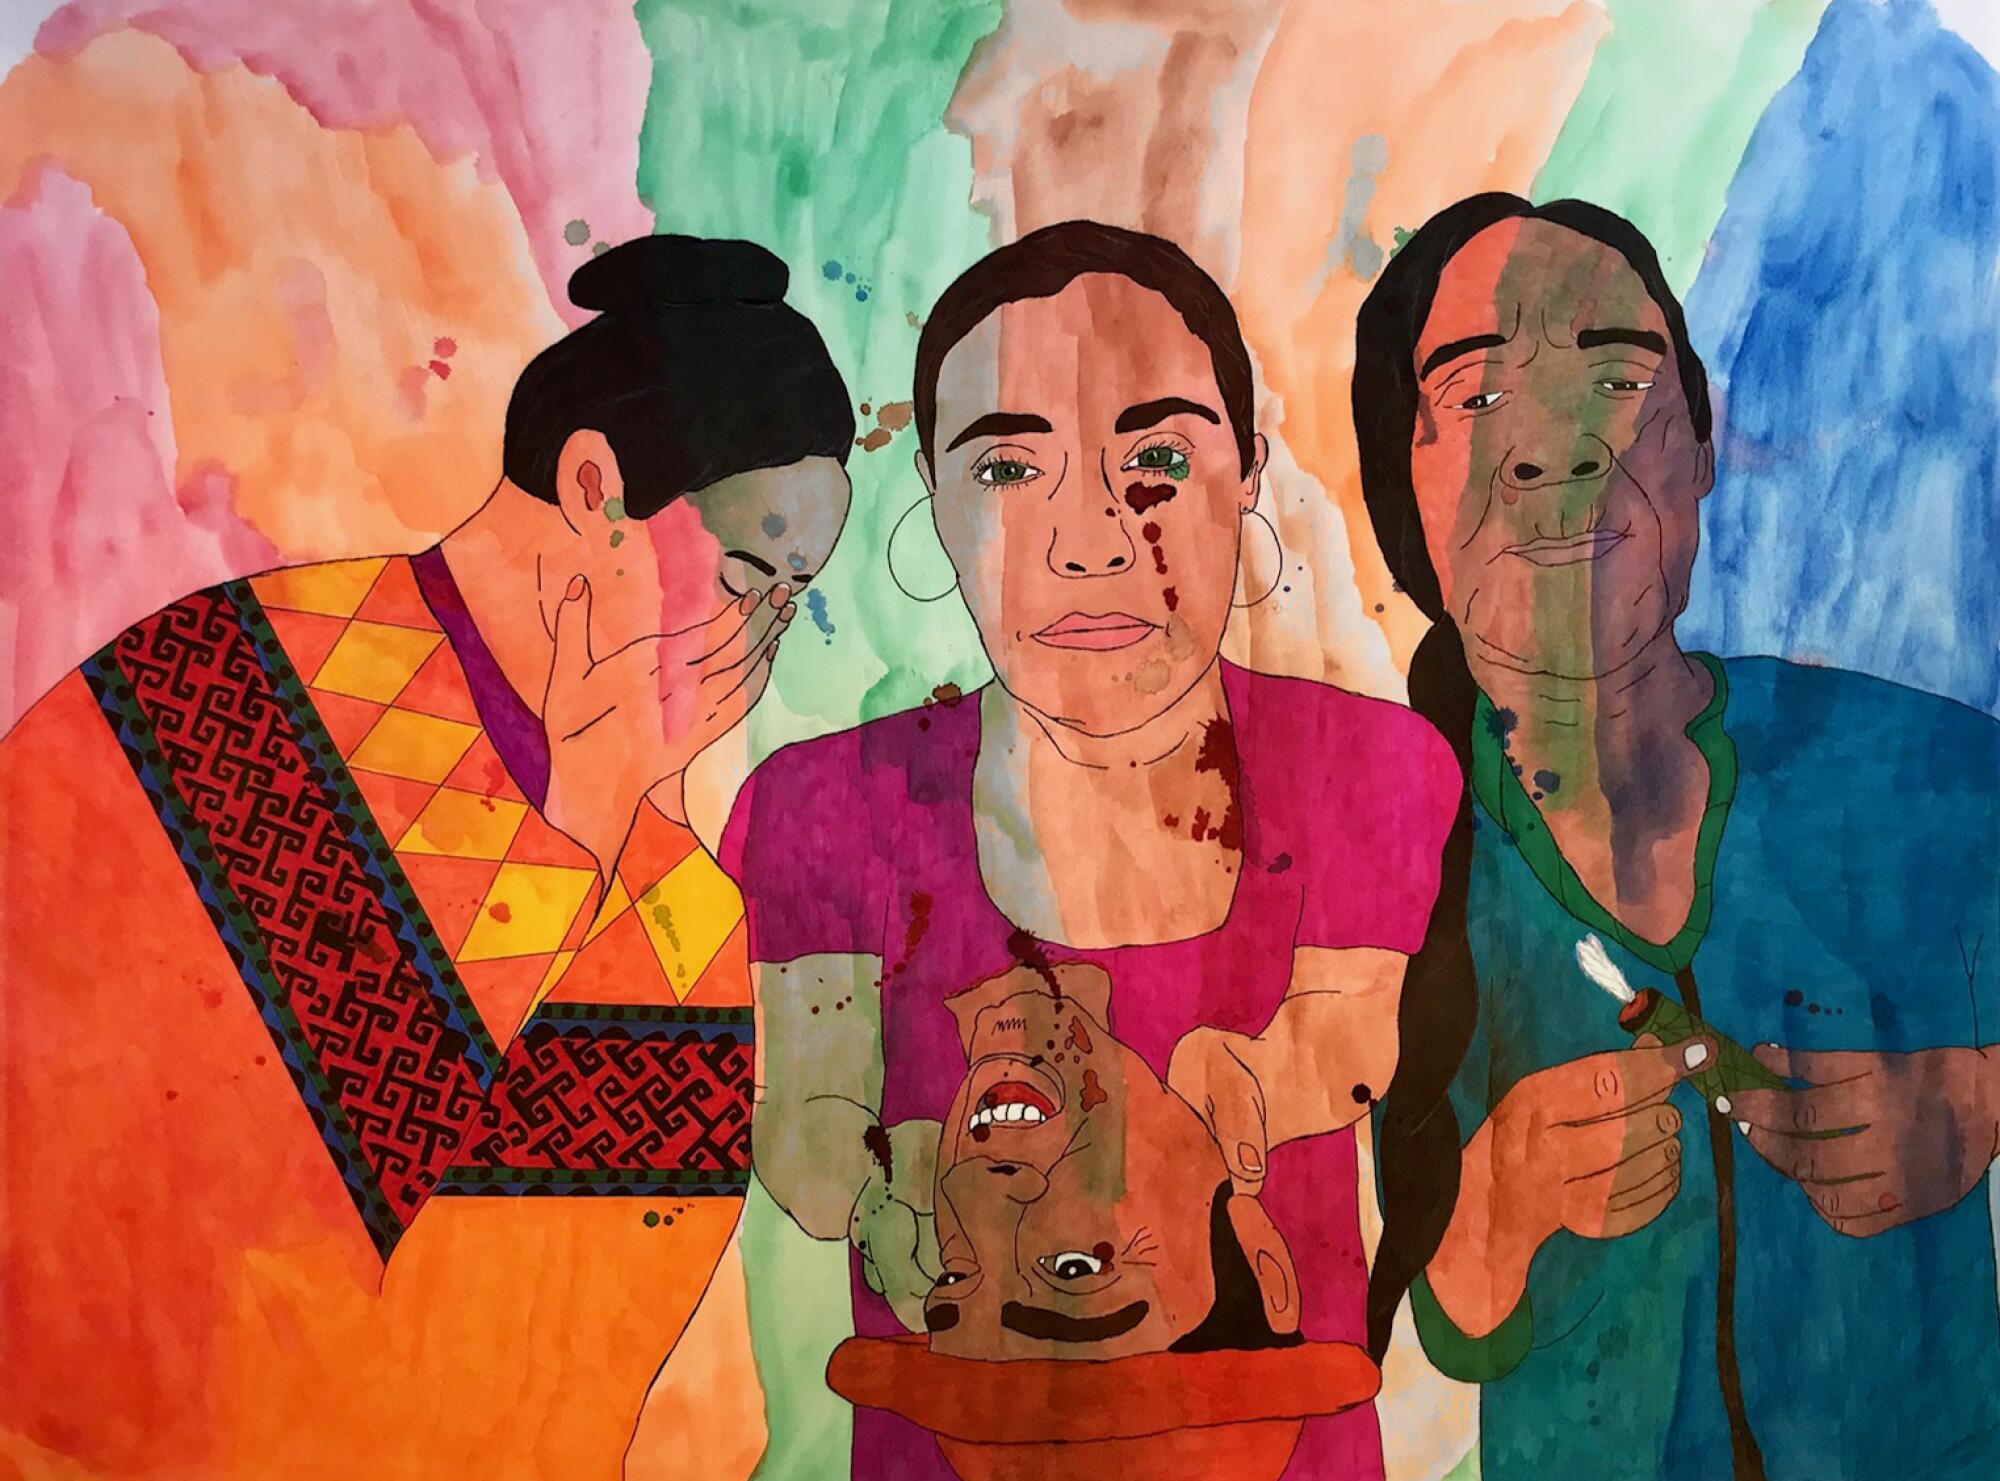 A bright watercolor shows three women, one covering her face, holding a man's severed head.